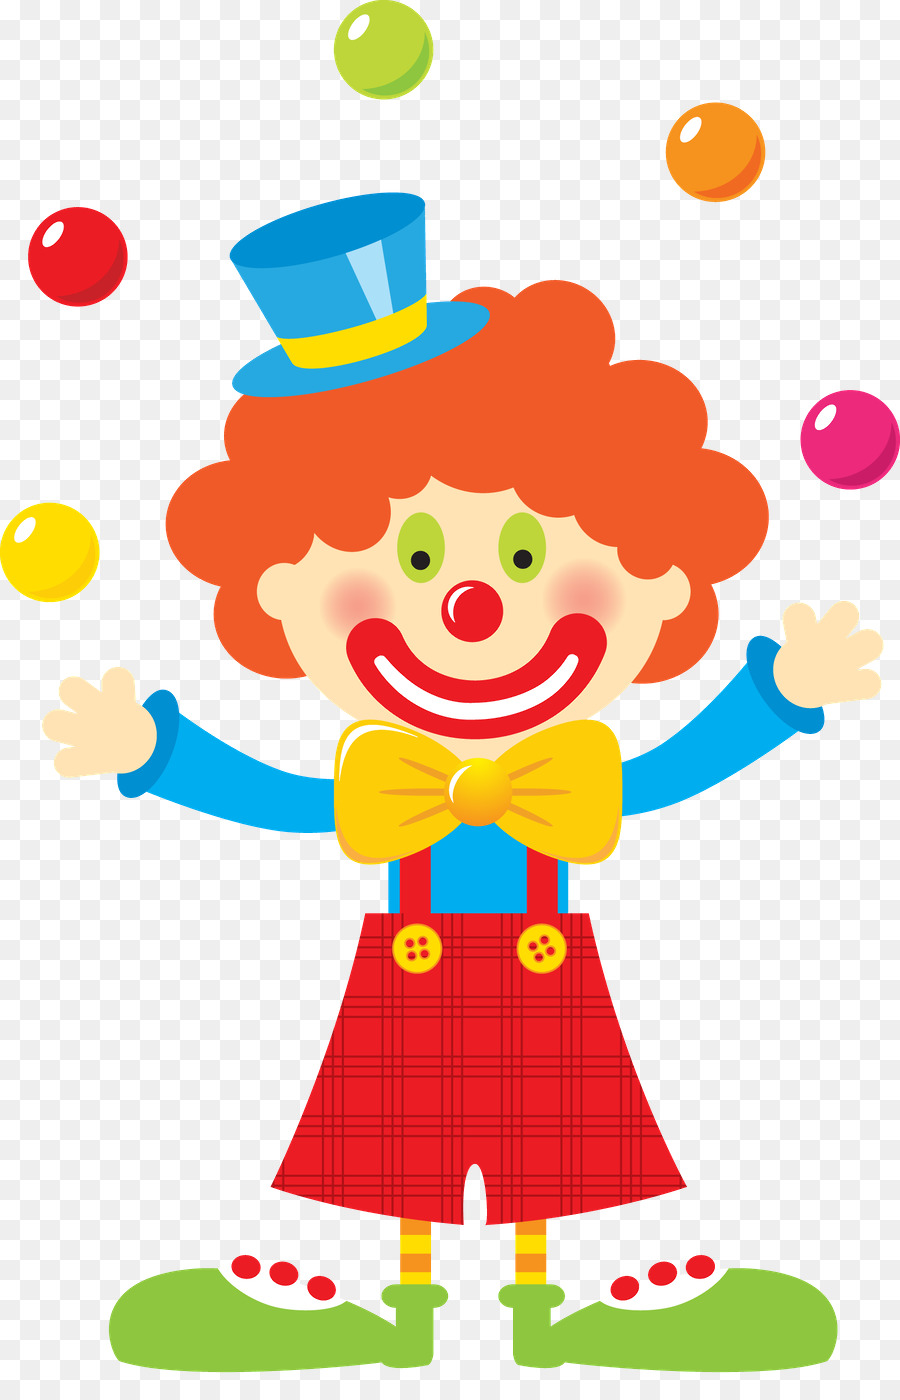 Circus Baby clipart